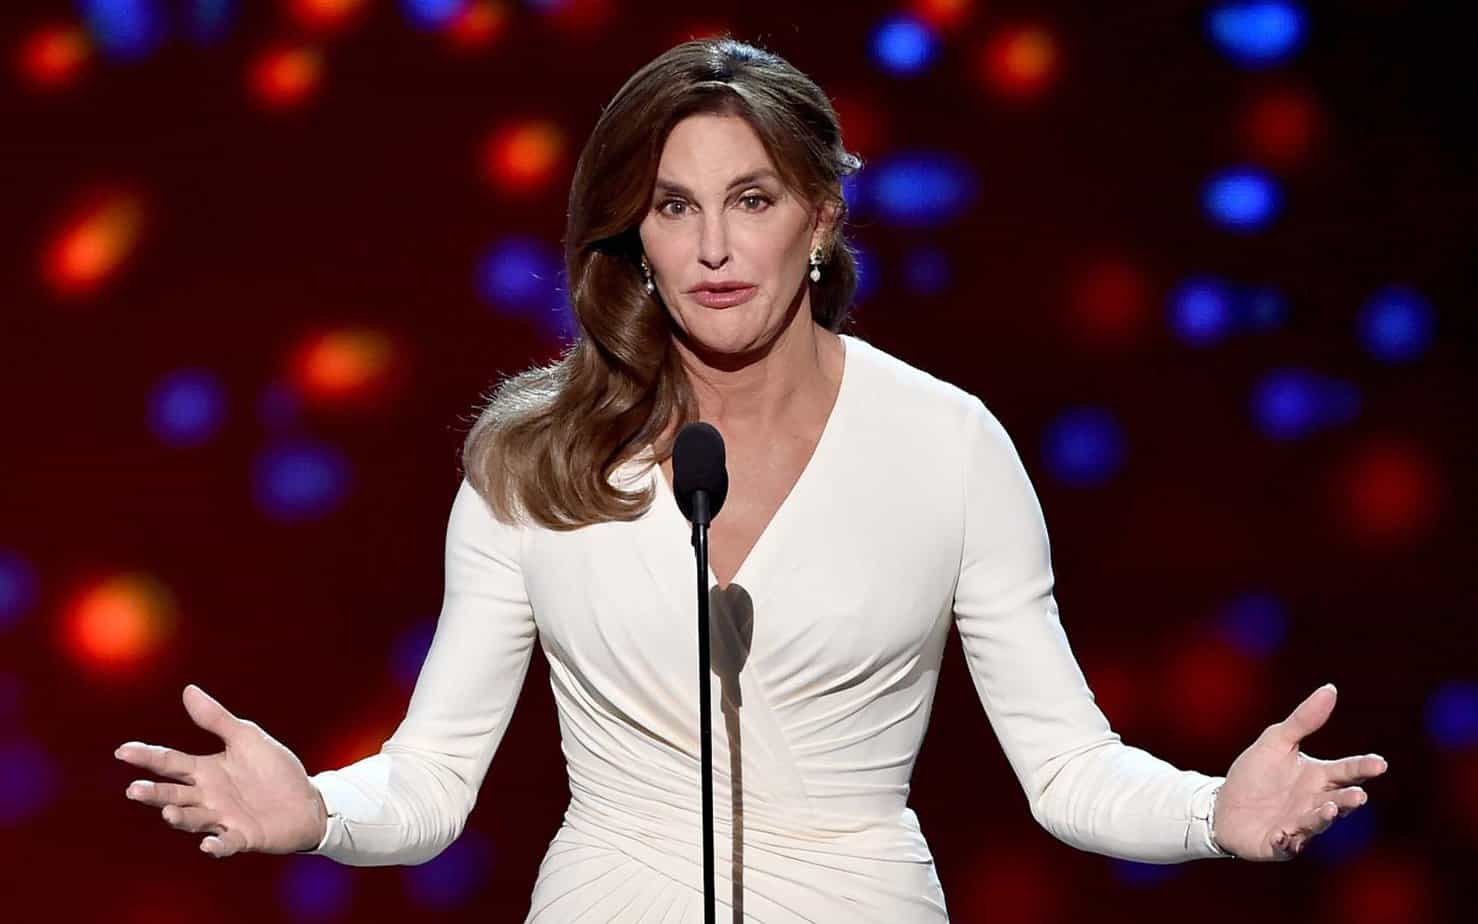 CAITLYN JENNER FIRED - Exposed for accepting payments